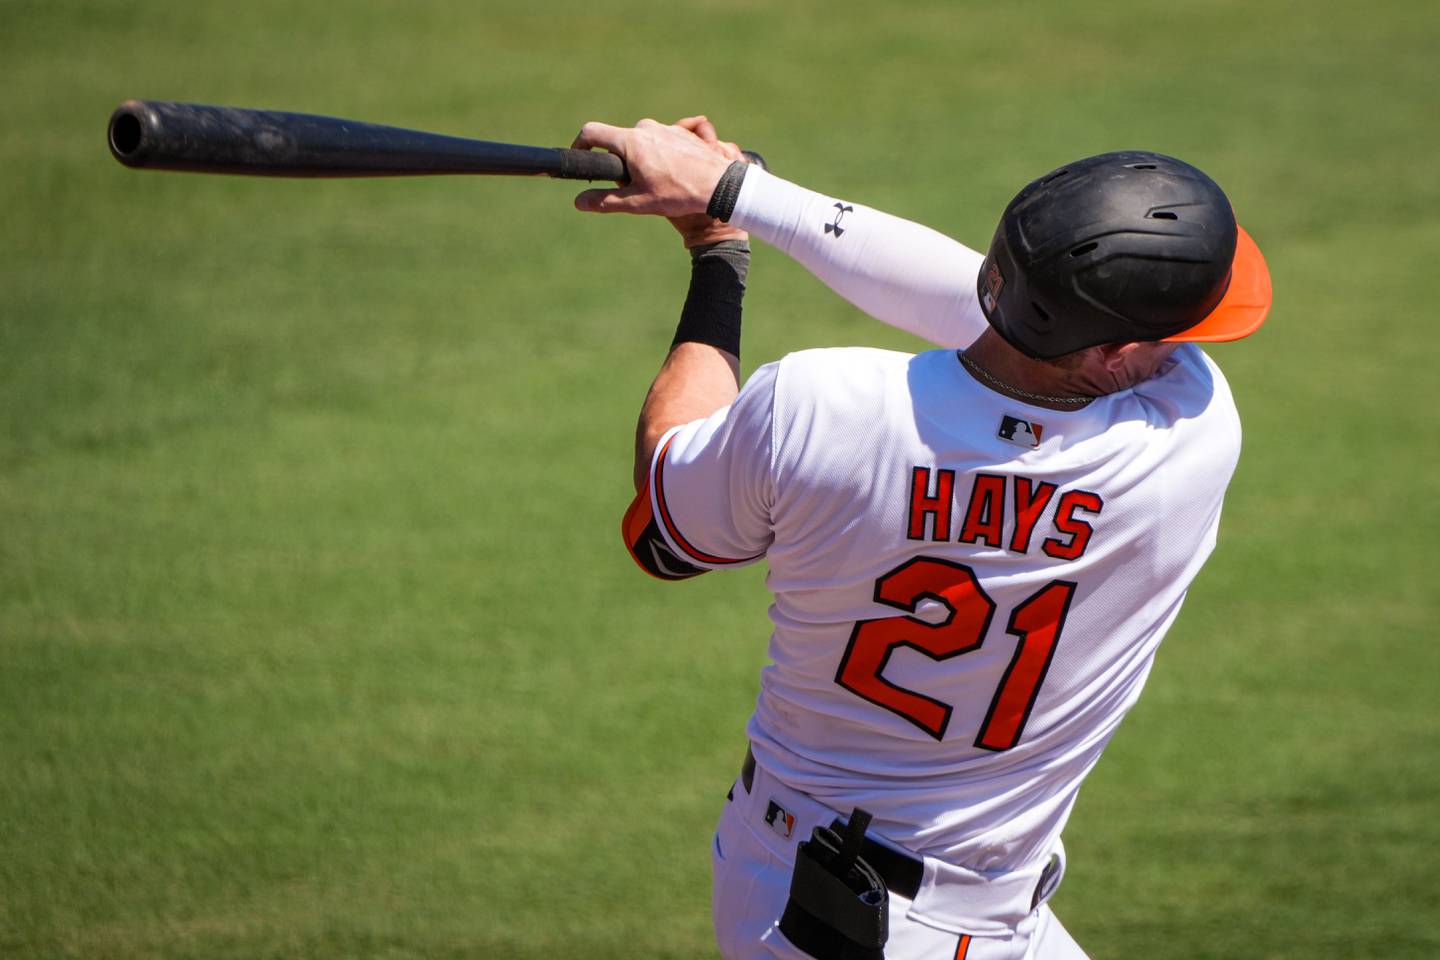 Austin Hays (21) swings for the ball at Ed Smith Stadium during the second inning of a game against the Toronto Blue Jays on 3/1/23. The Baltimore Orioles lost to the Blue Jays, 2-1, in the Florida Grapefruit League matchup